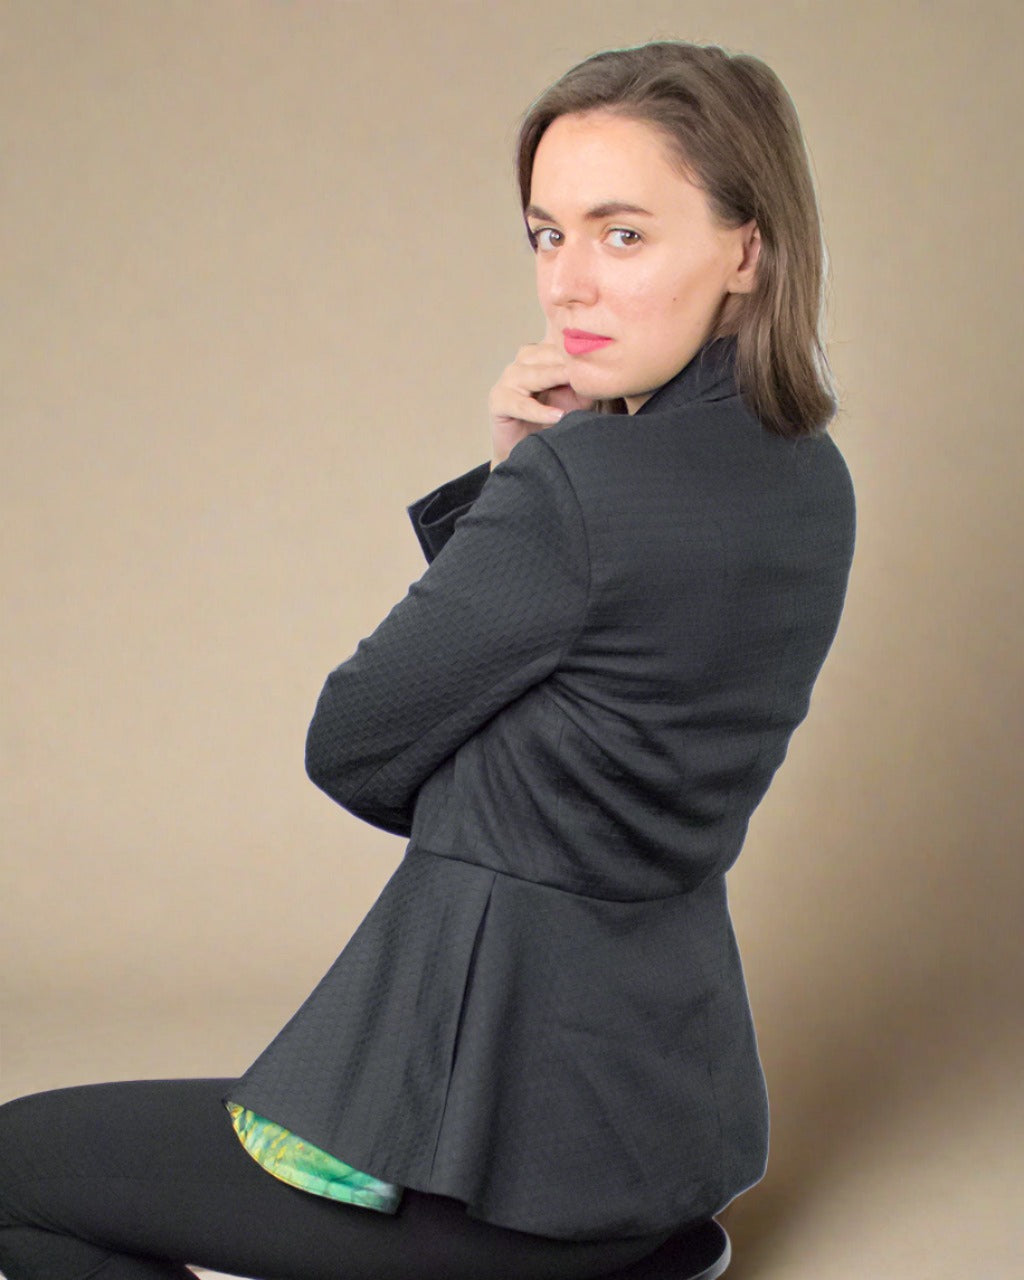 Sustainable basics by ADKN a smart peplum fitted tailored black blazer jacket with pockets made from recycled plastic bottles